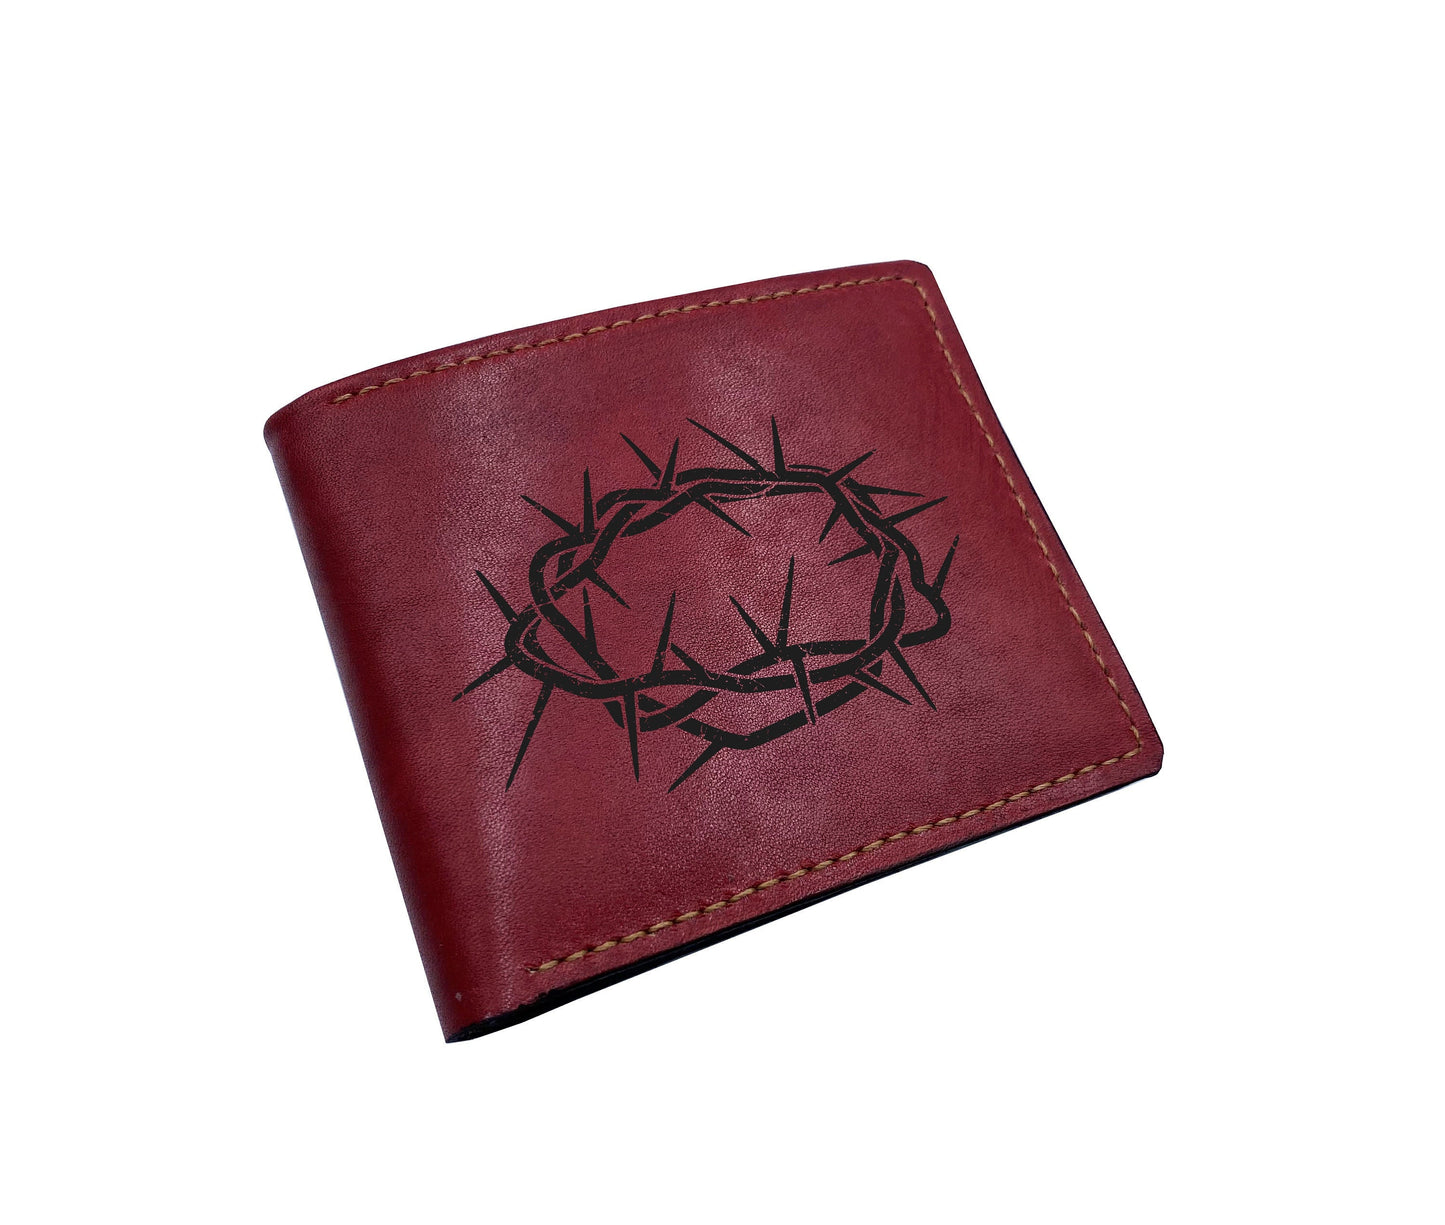 Crown of Thorns Jesus drawing art pattern, Christian Xmas birthday gift ideas, meaningful wallet for Christian men, wallet for husband